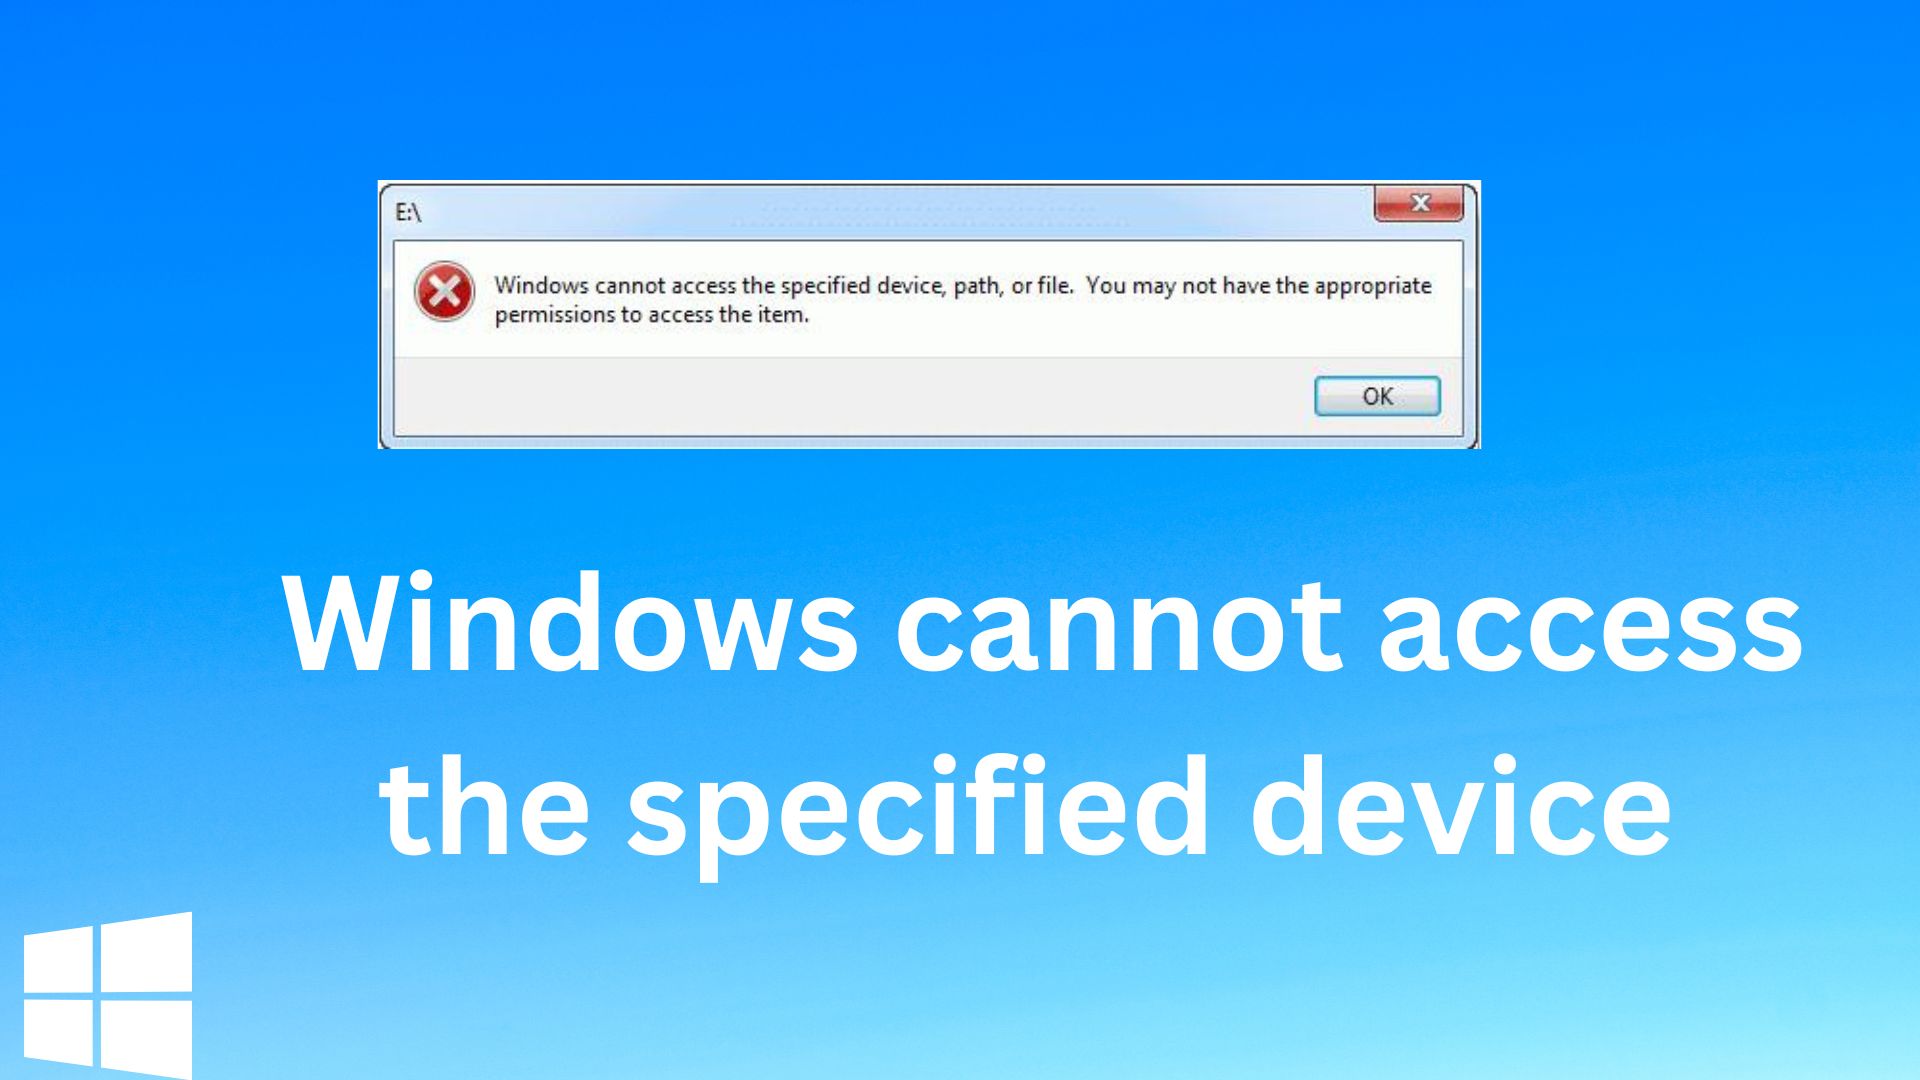 Windows cannot access the specified device